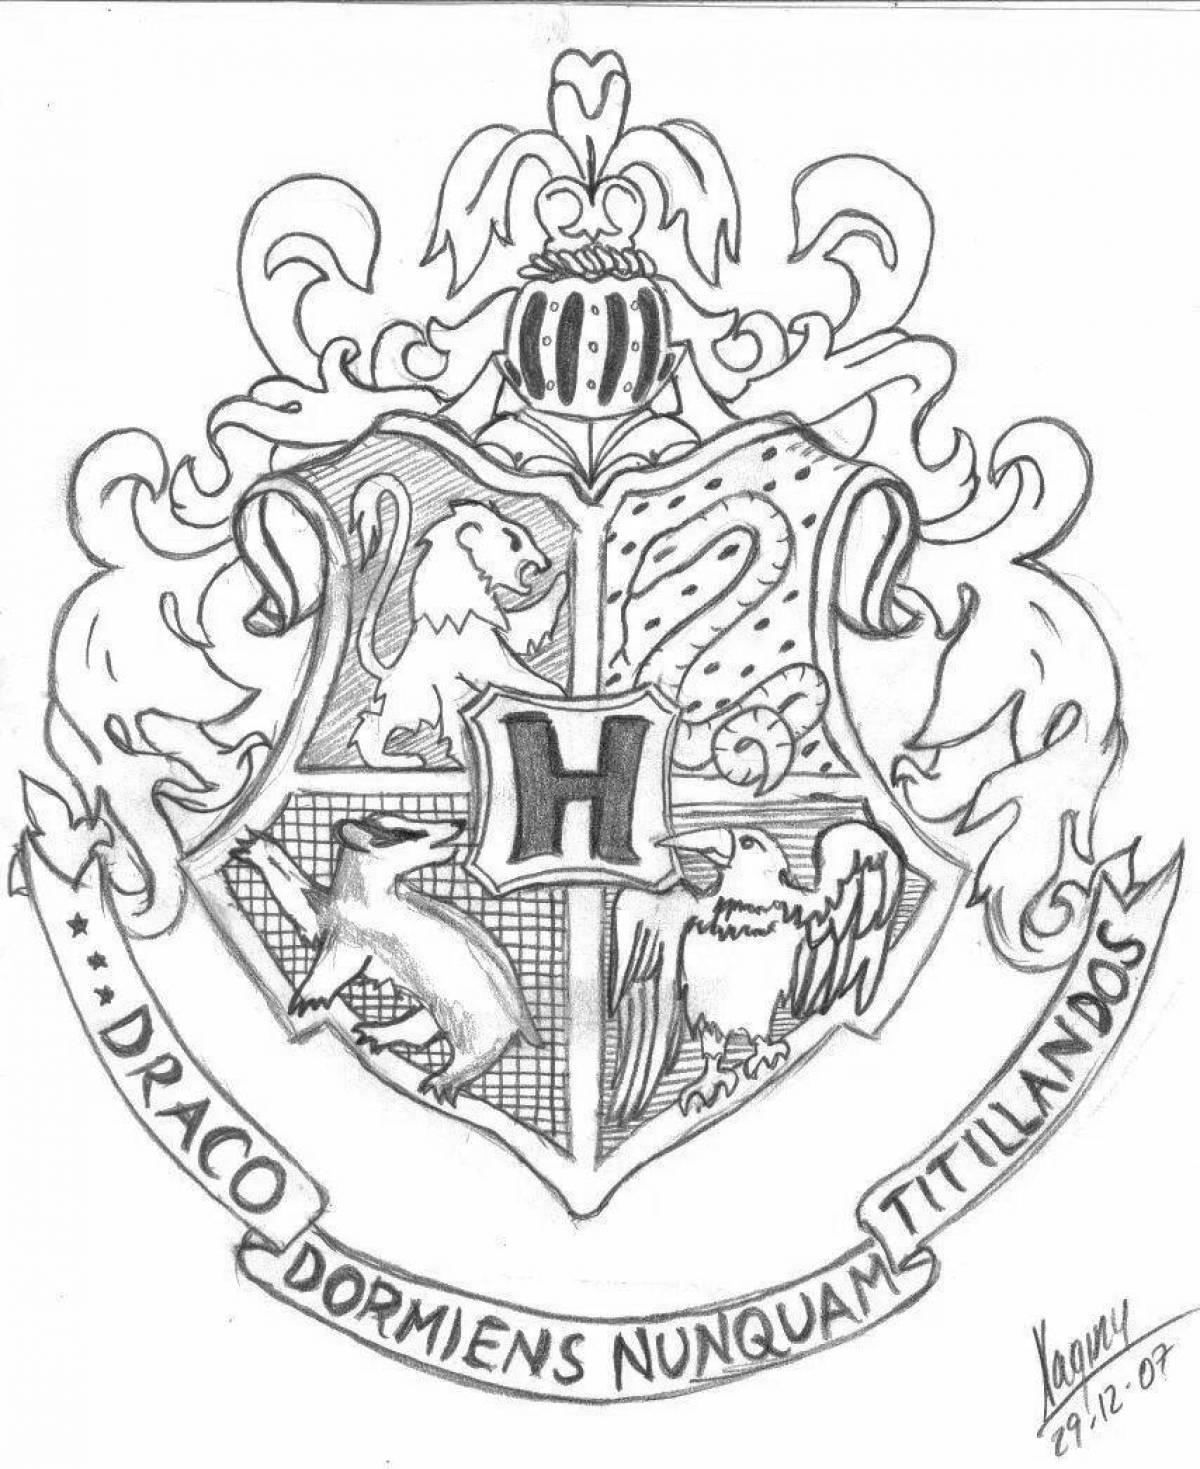 Exquisite coloring of the coat of arms of Hogwarts